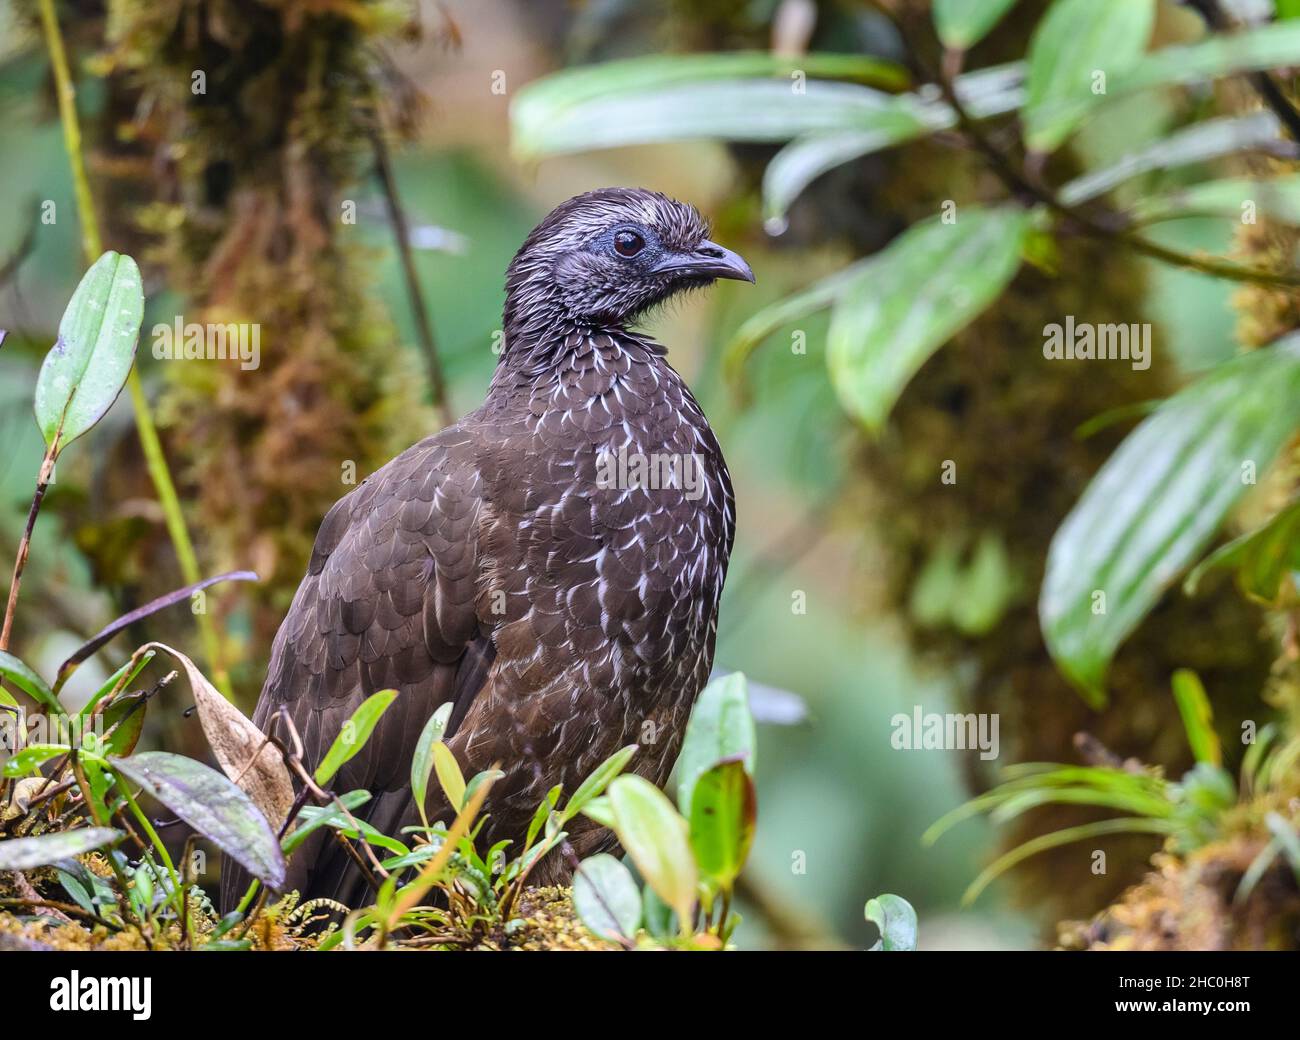 A Bearded Guan (Penelope barbata) on the forest. Ecuador, South America. Stock Photo